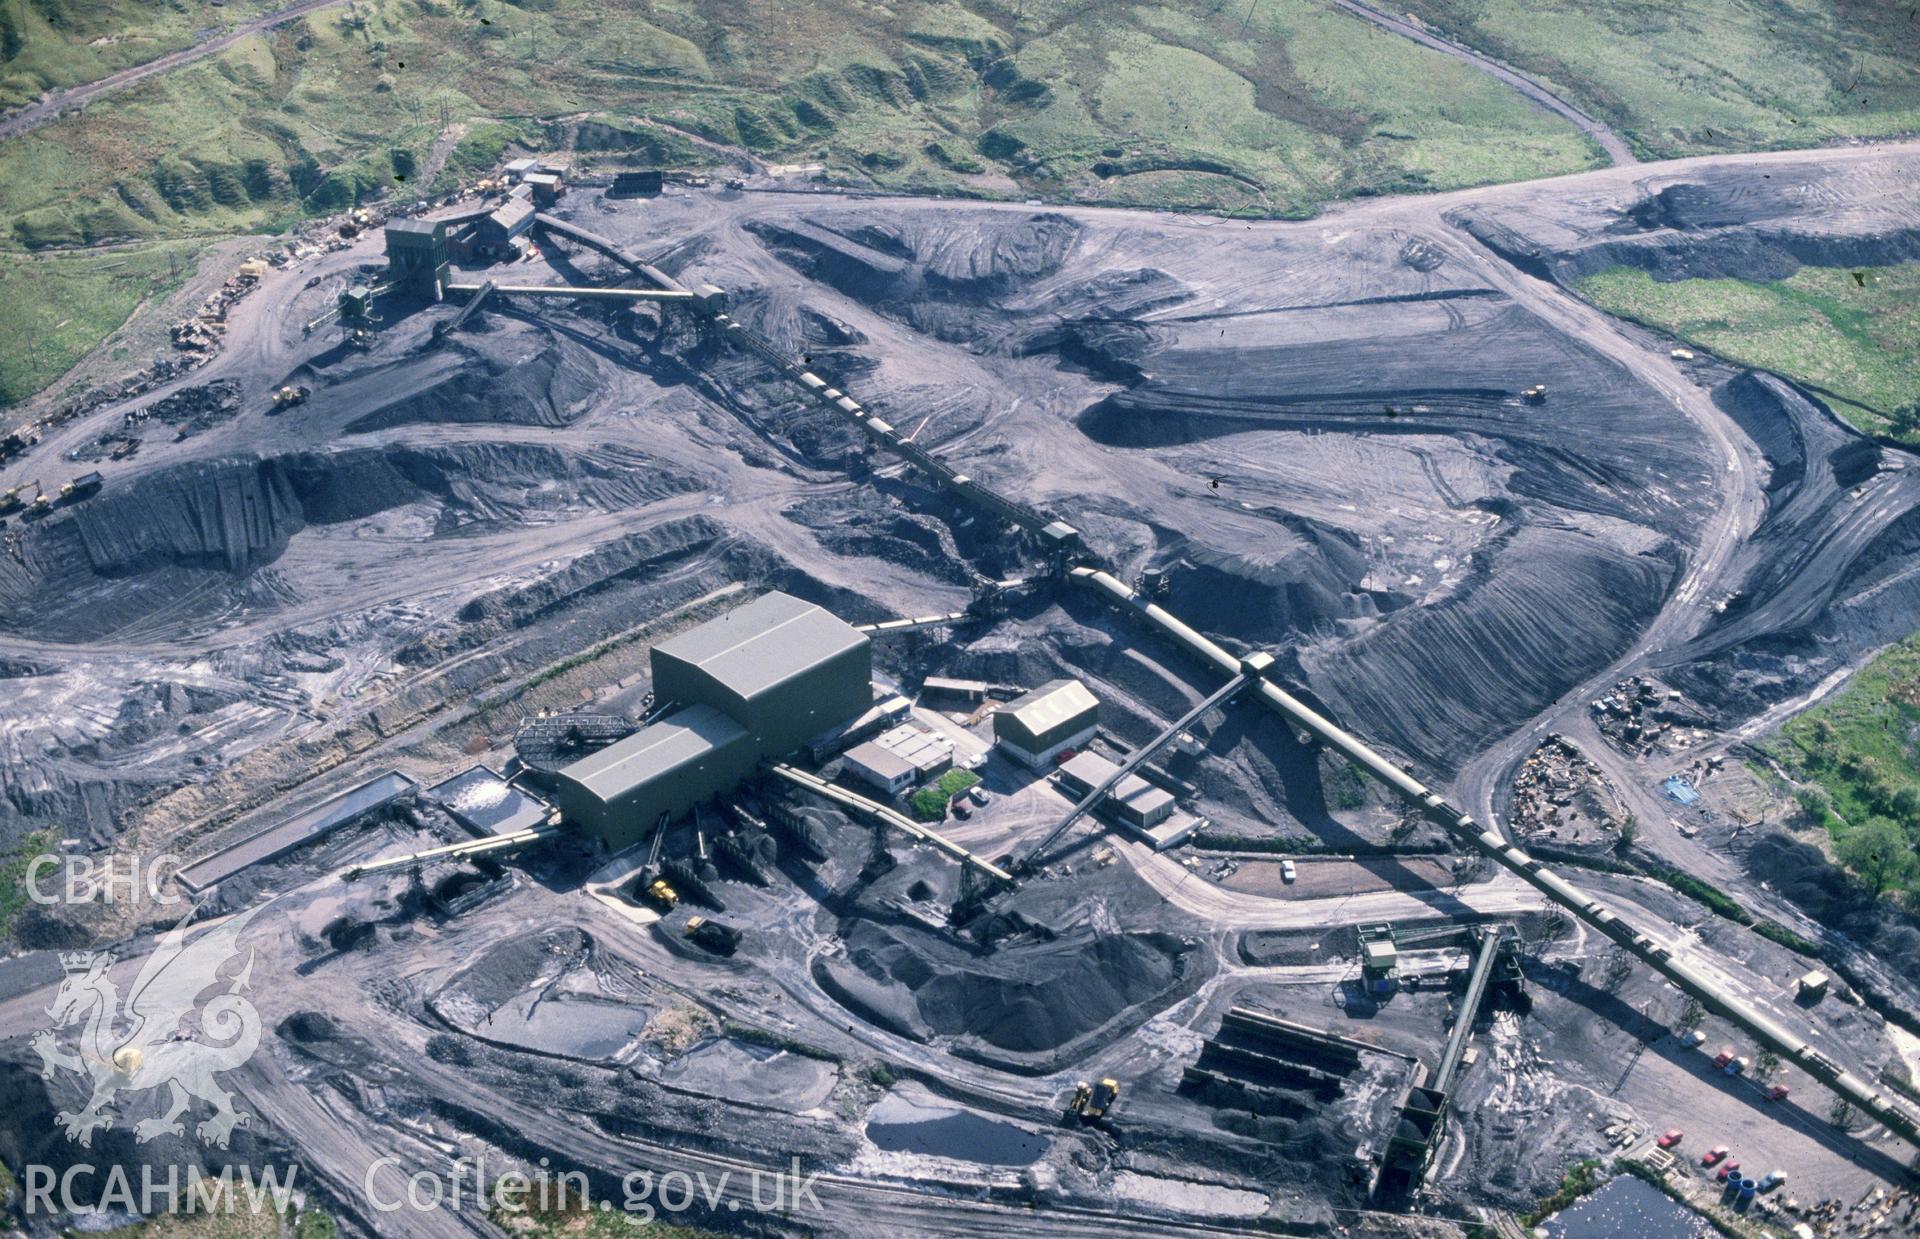 Slide of RCAHMW colour oblique aerial photograph of Tower Drift Mine, Hirwaun, taken by C.R. Musson, 29/5/1990.